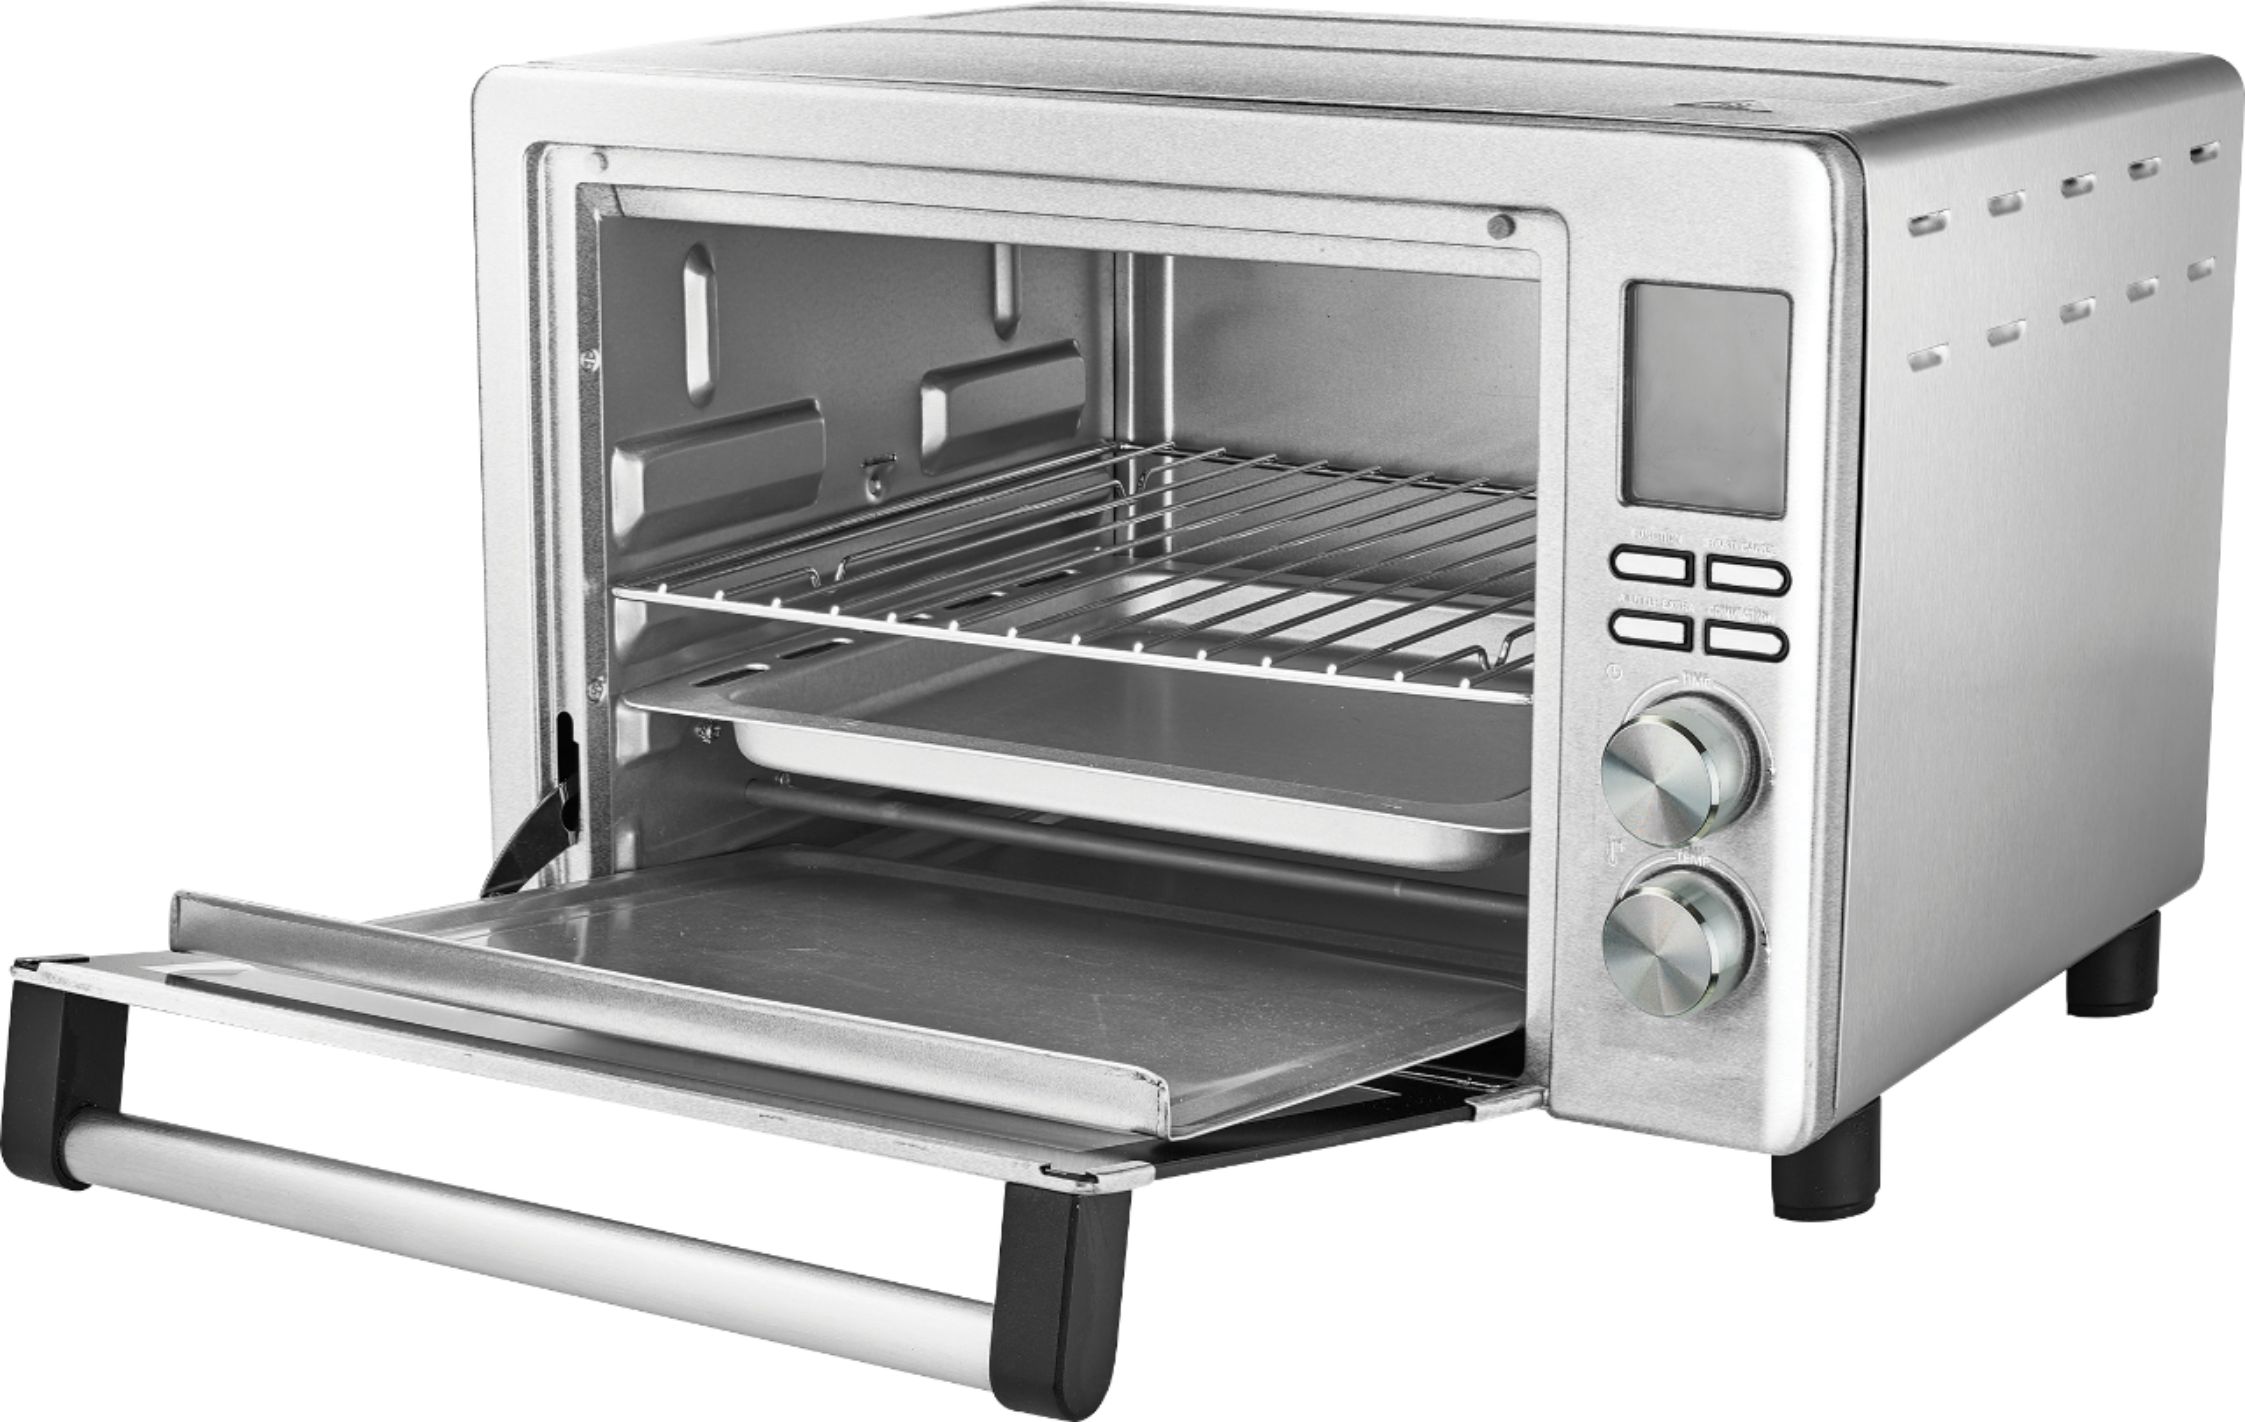 DELUXE 6 PAN BAKERY CONVECTION OVEN WITH STAND MODEL HSM-6 - OBR